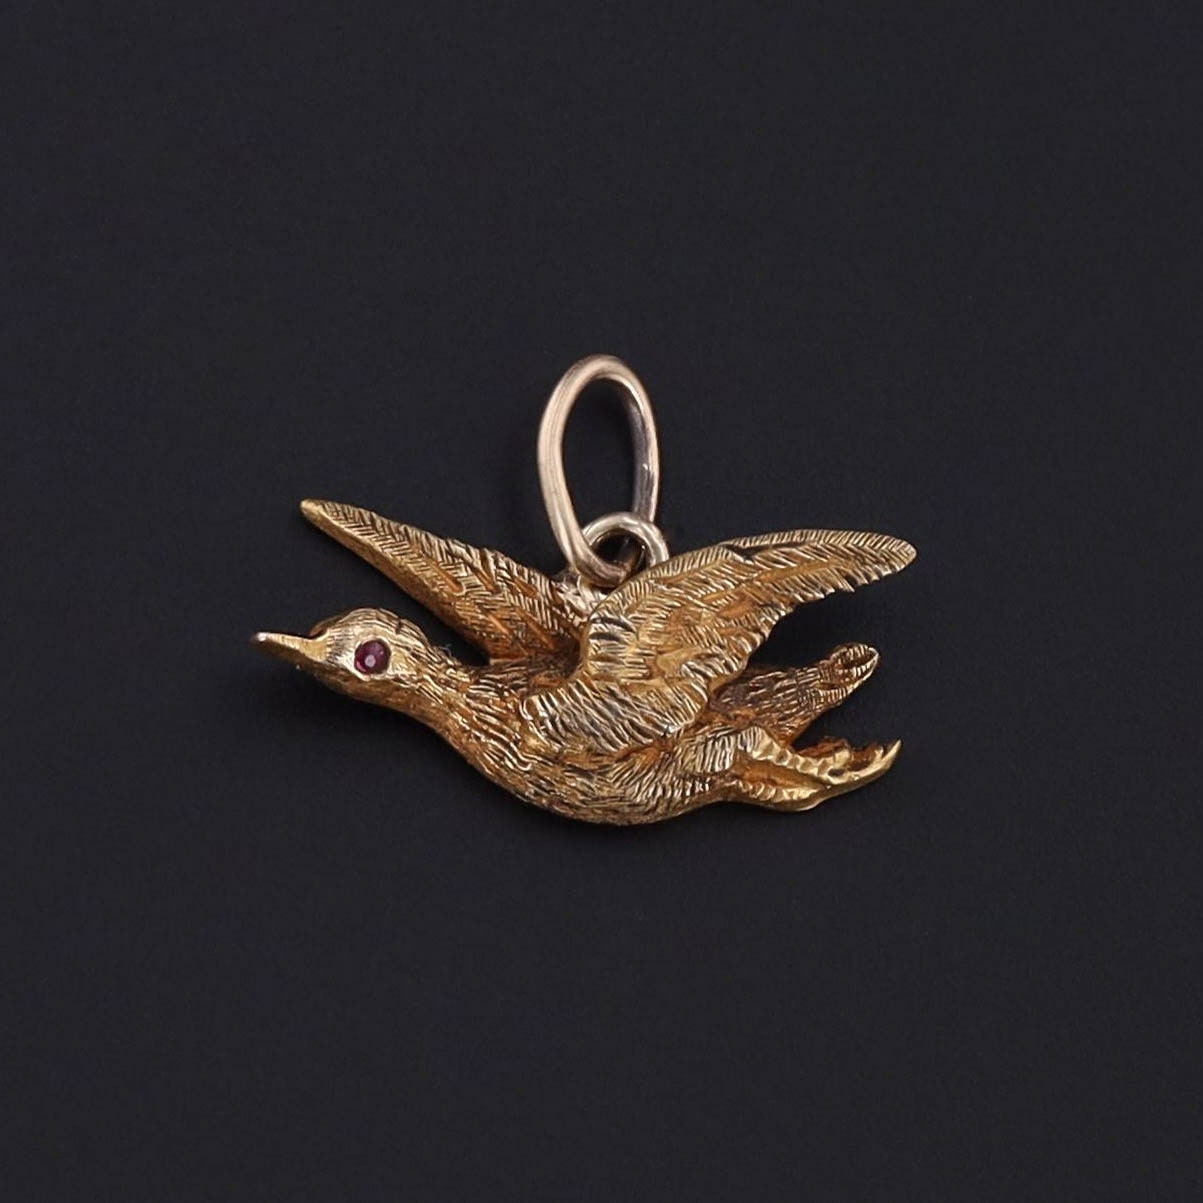 Antique Duck Conversion Charm of 14k Gold